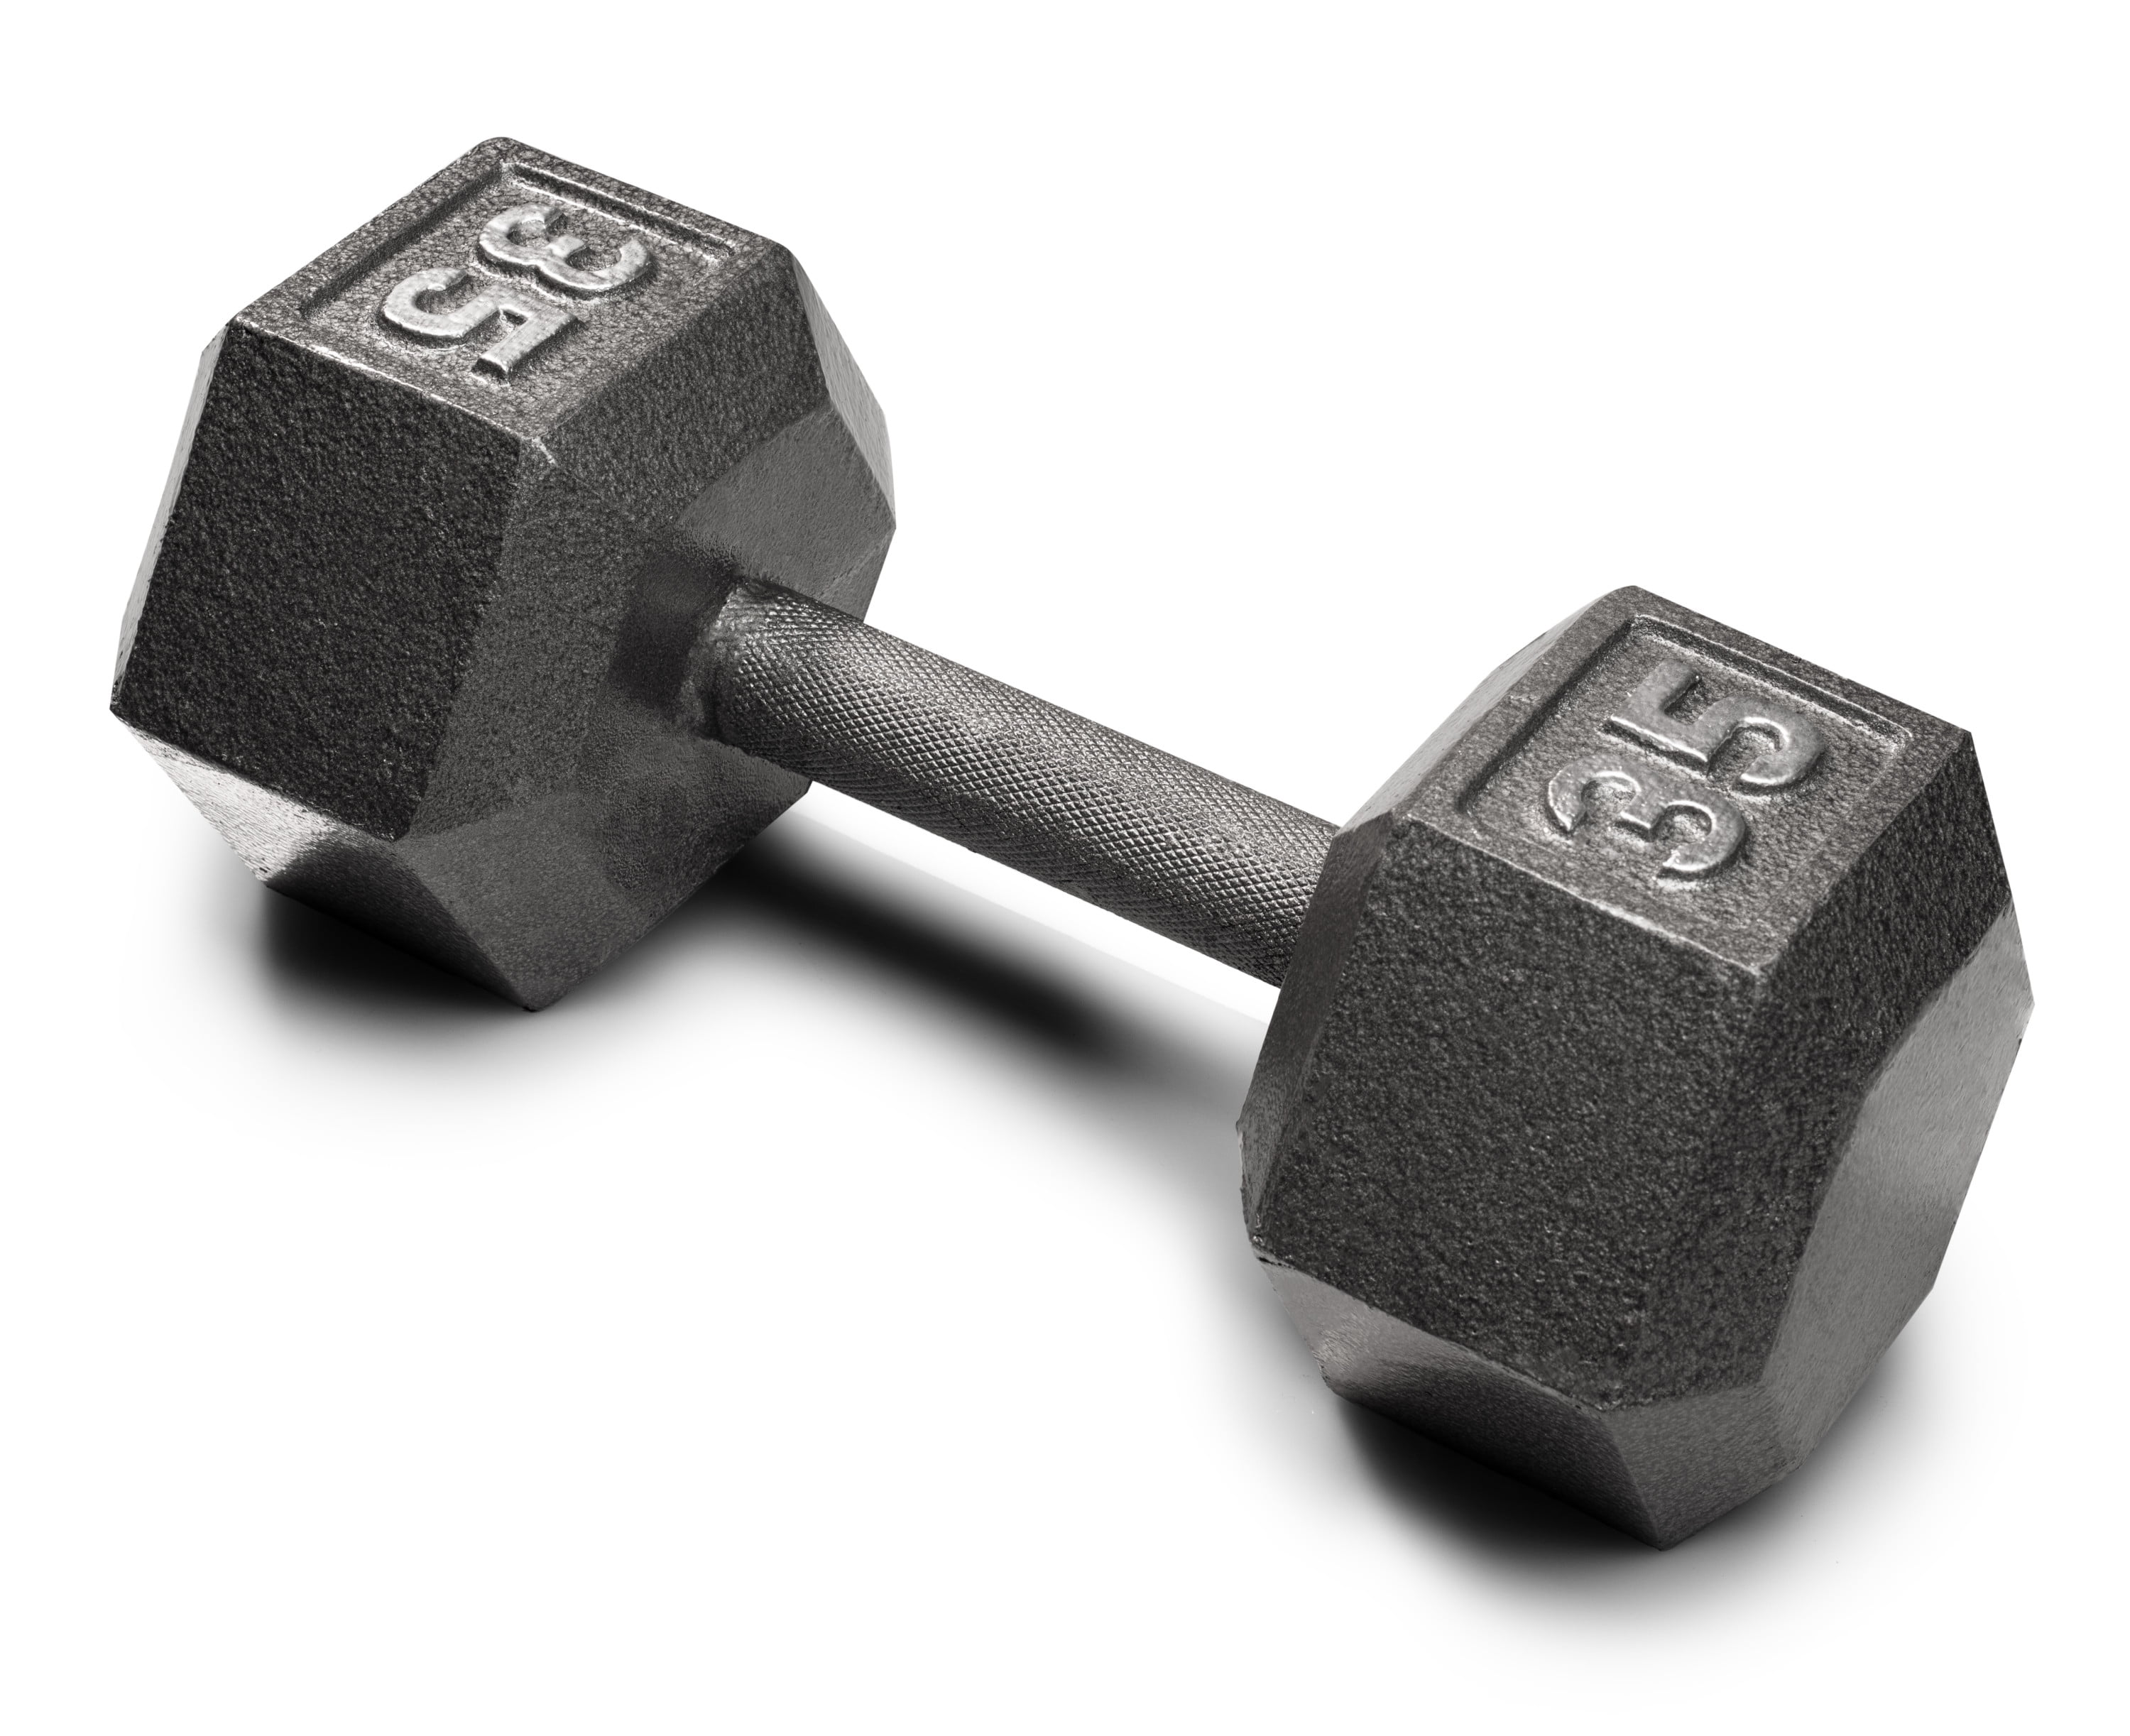 35LB Pair Of CAP Rubber Coated Hex Dumbells 70lbs Total Weight Weider FREE SHIP“ 